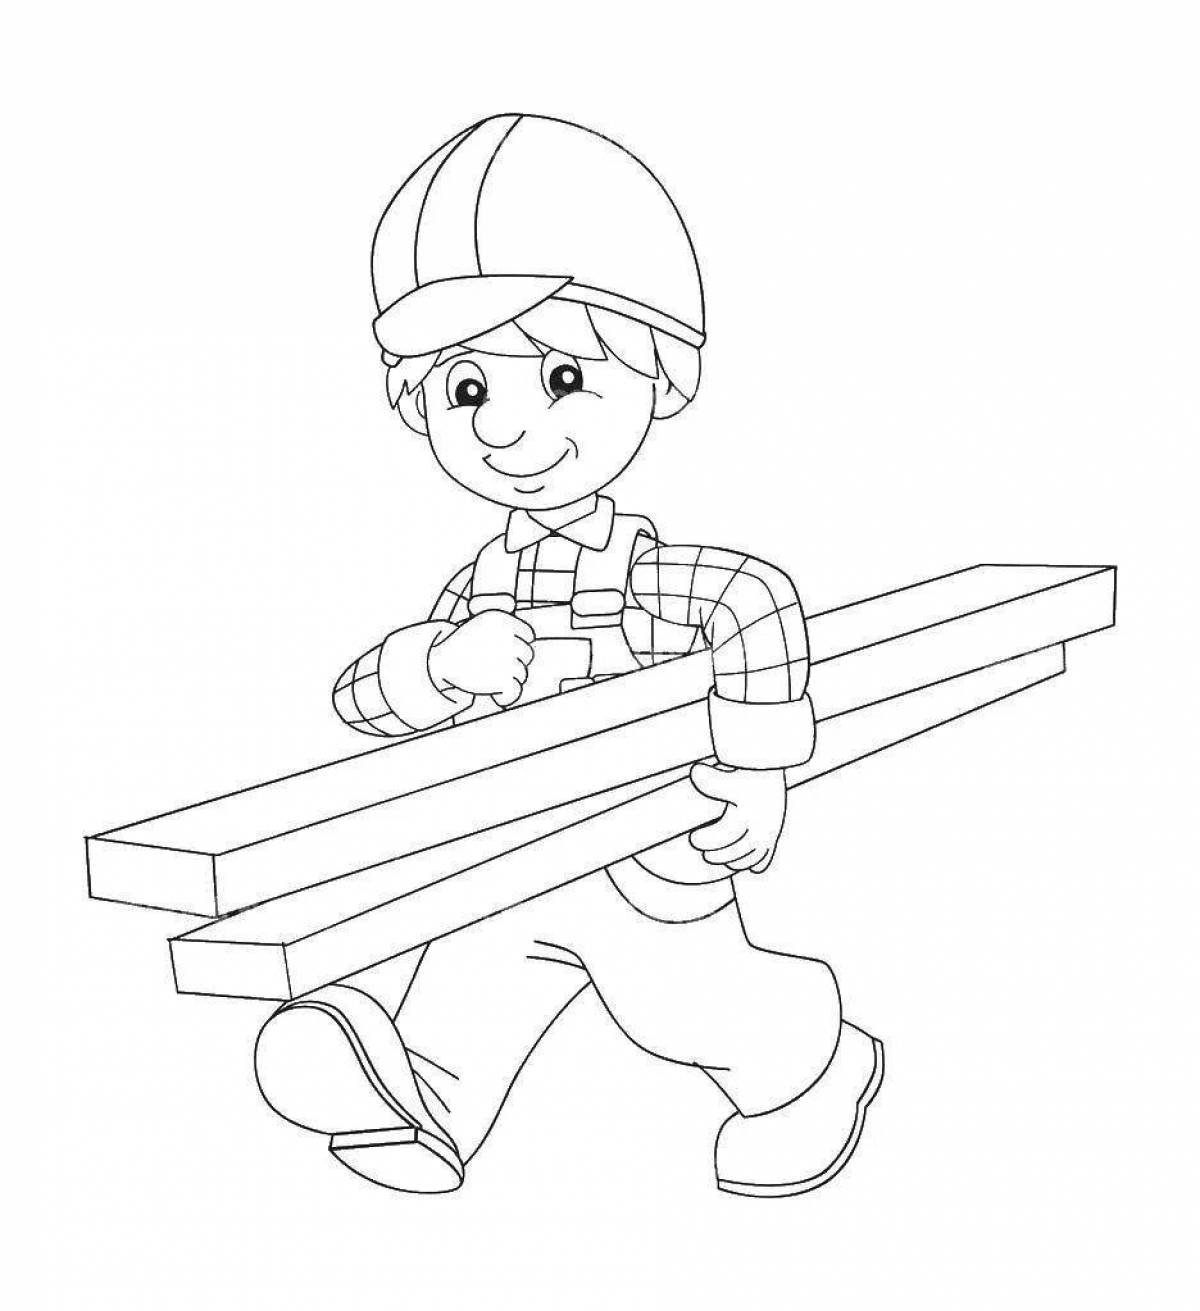 Coloring book intriguing construction professions